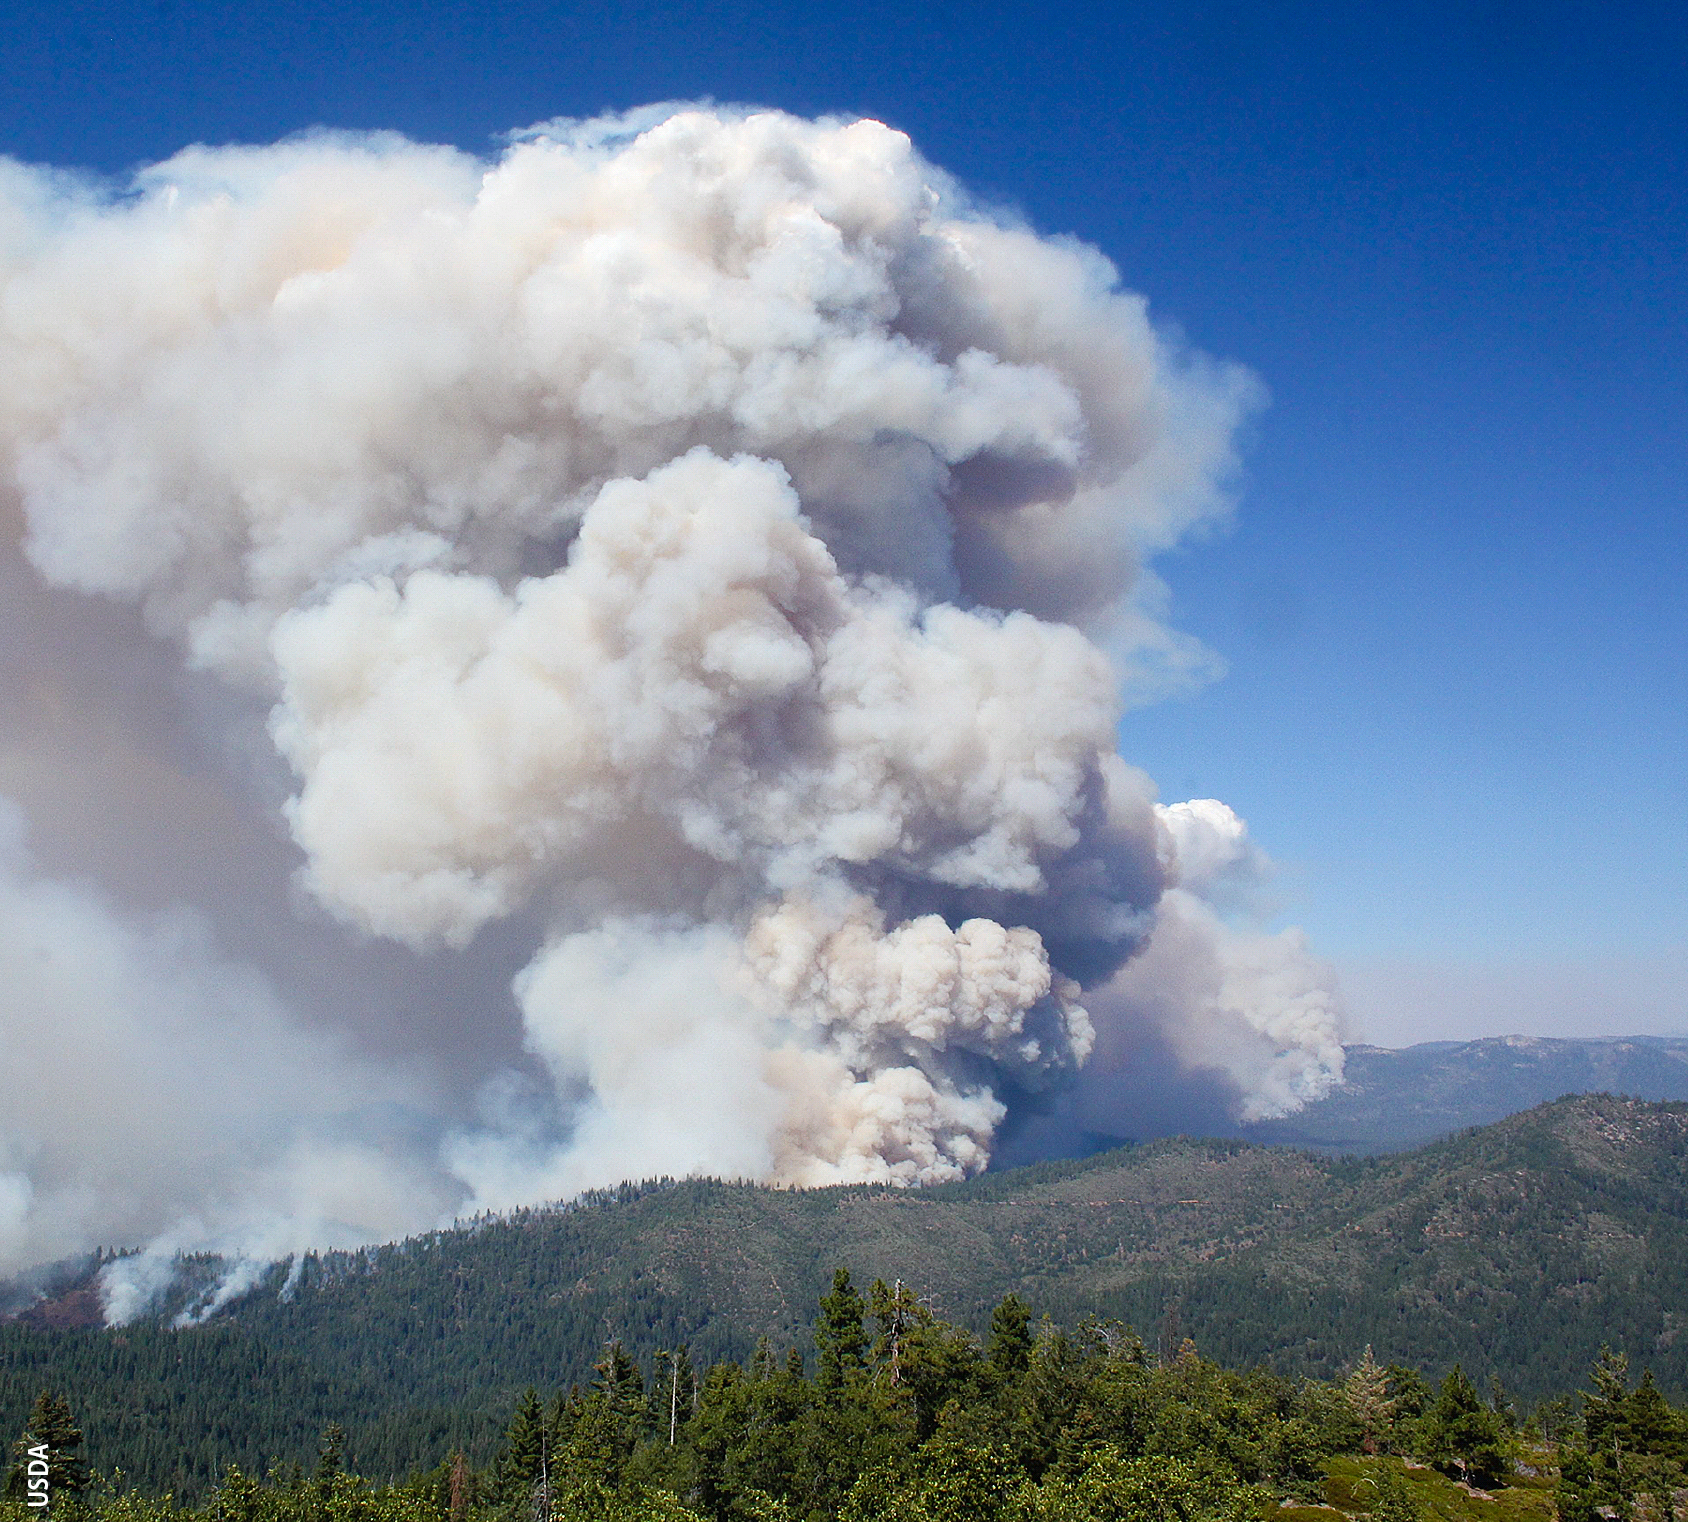 The Rim Fire near Yosemite National Park burned 400 square miles in 2013. Results from a UC Davis School of Veterinary Medicine study suggest that exposure to wildfire smoke during infancy may compromise lung function in adolescence.